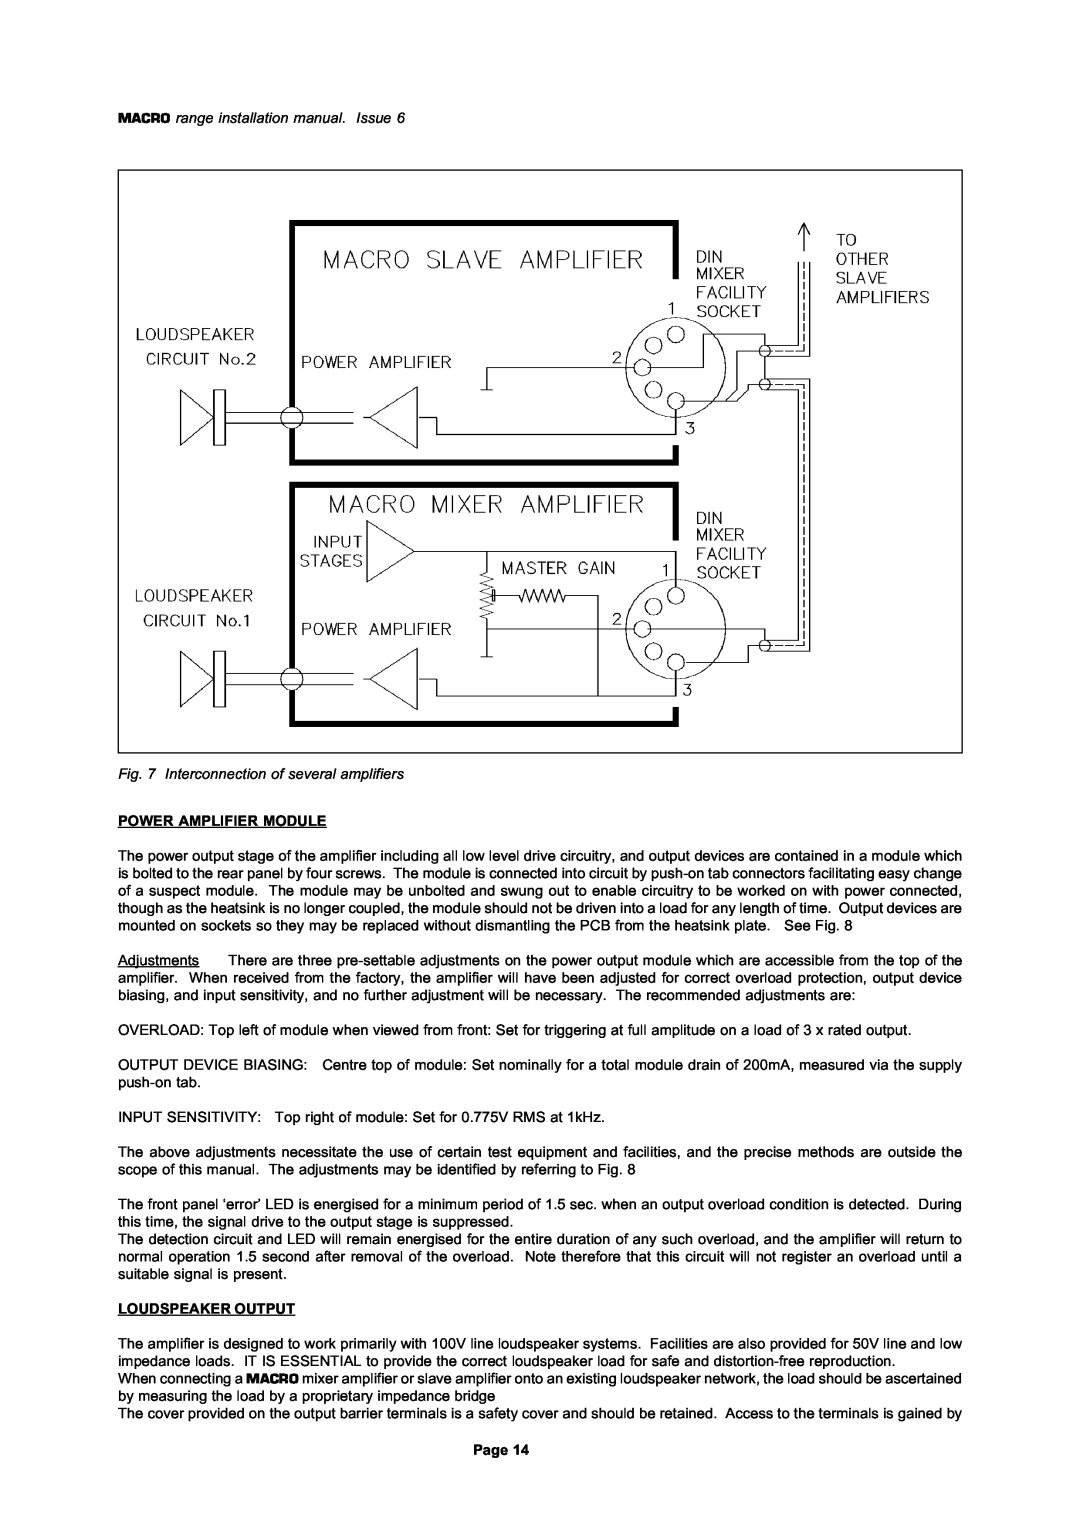 Mustang M100/S, M/8M MACRO range installation manual. Issue, Interconnection of several amplifiers, Power Amplifier Module 